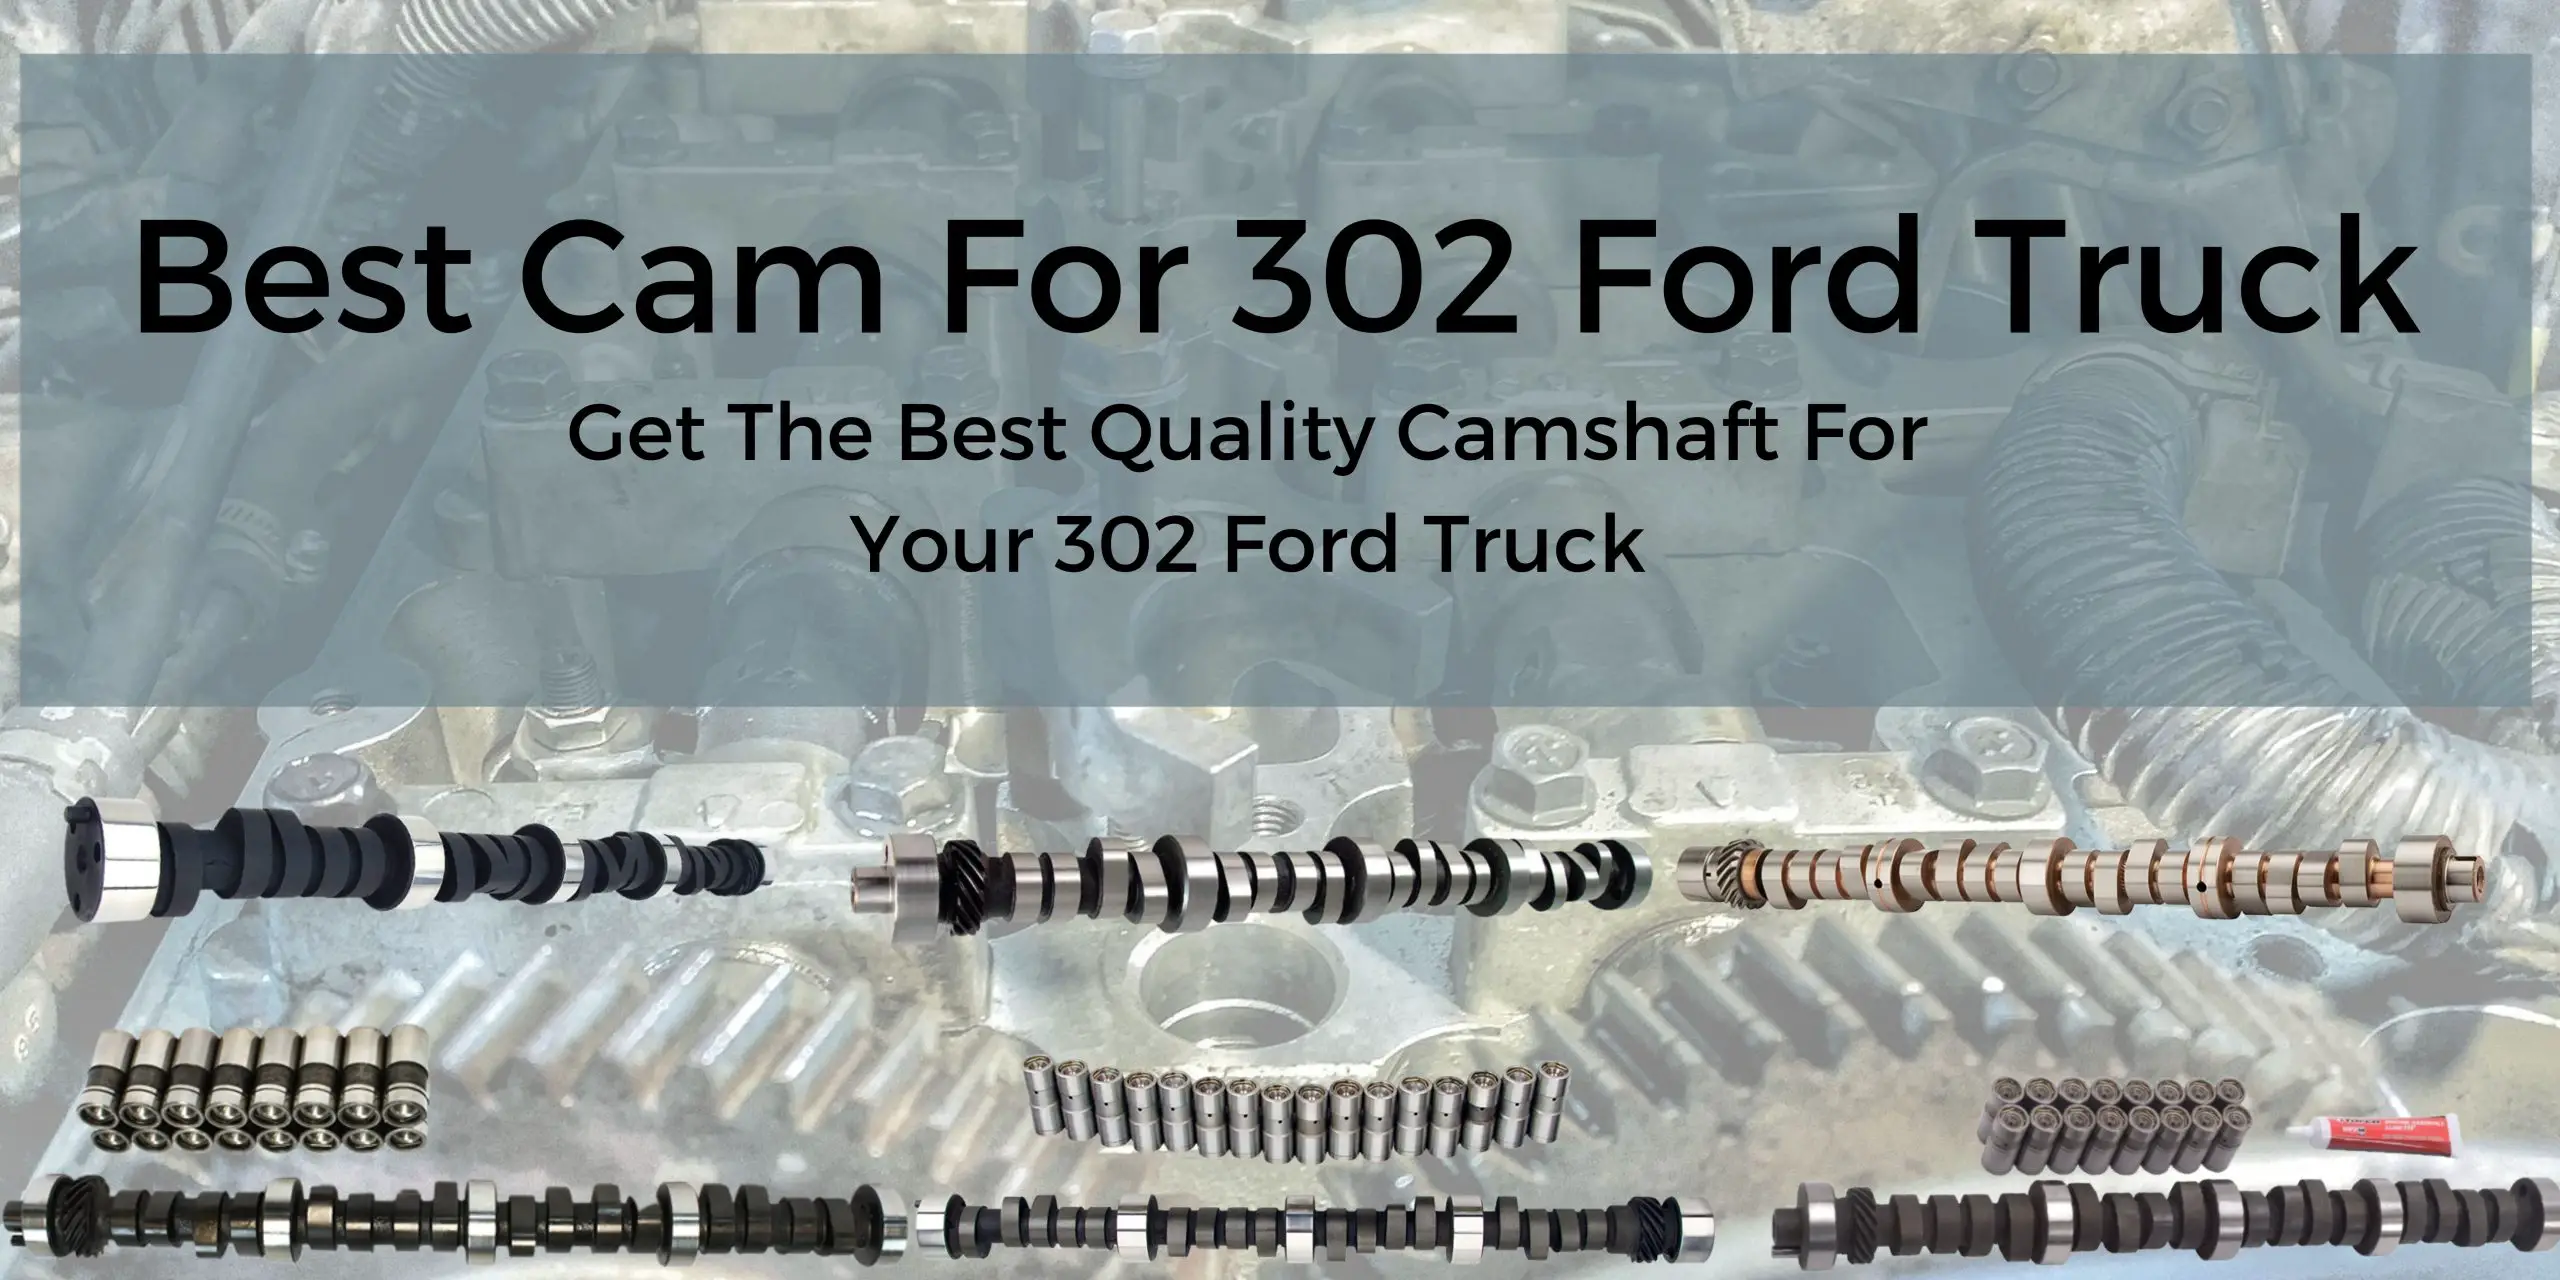 Best Cam For 302 Ford Truck